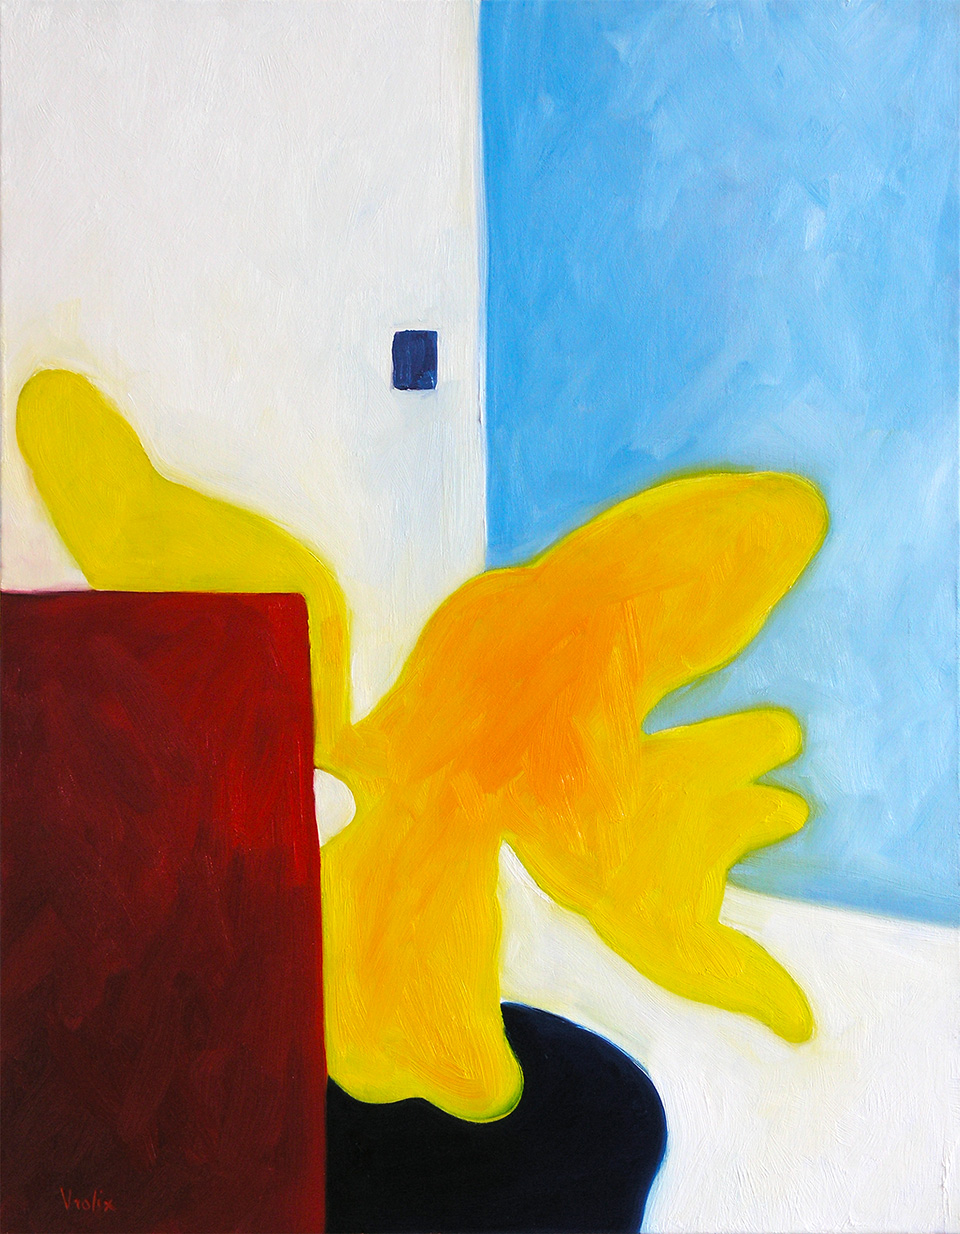 Studio Monster 3, a painting by Guido Vrolix